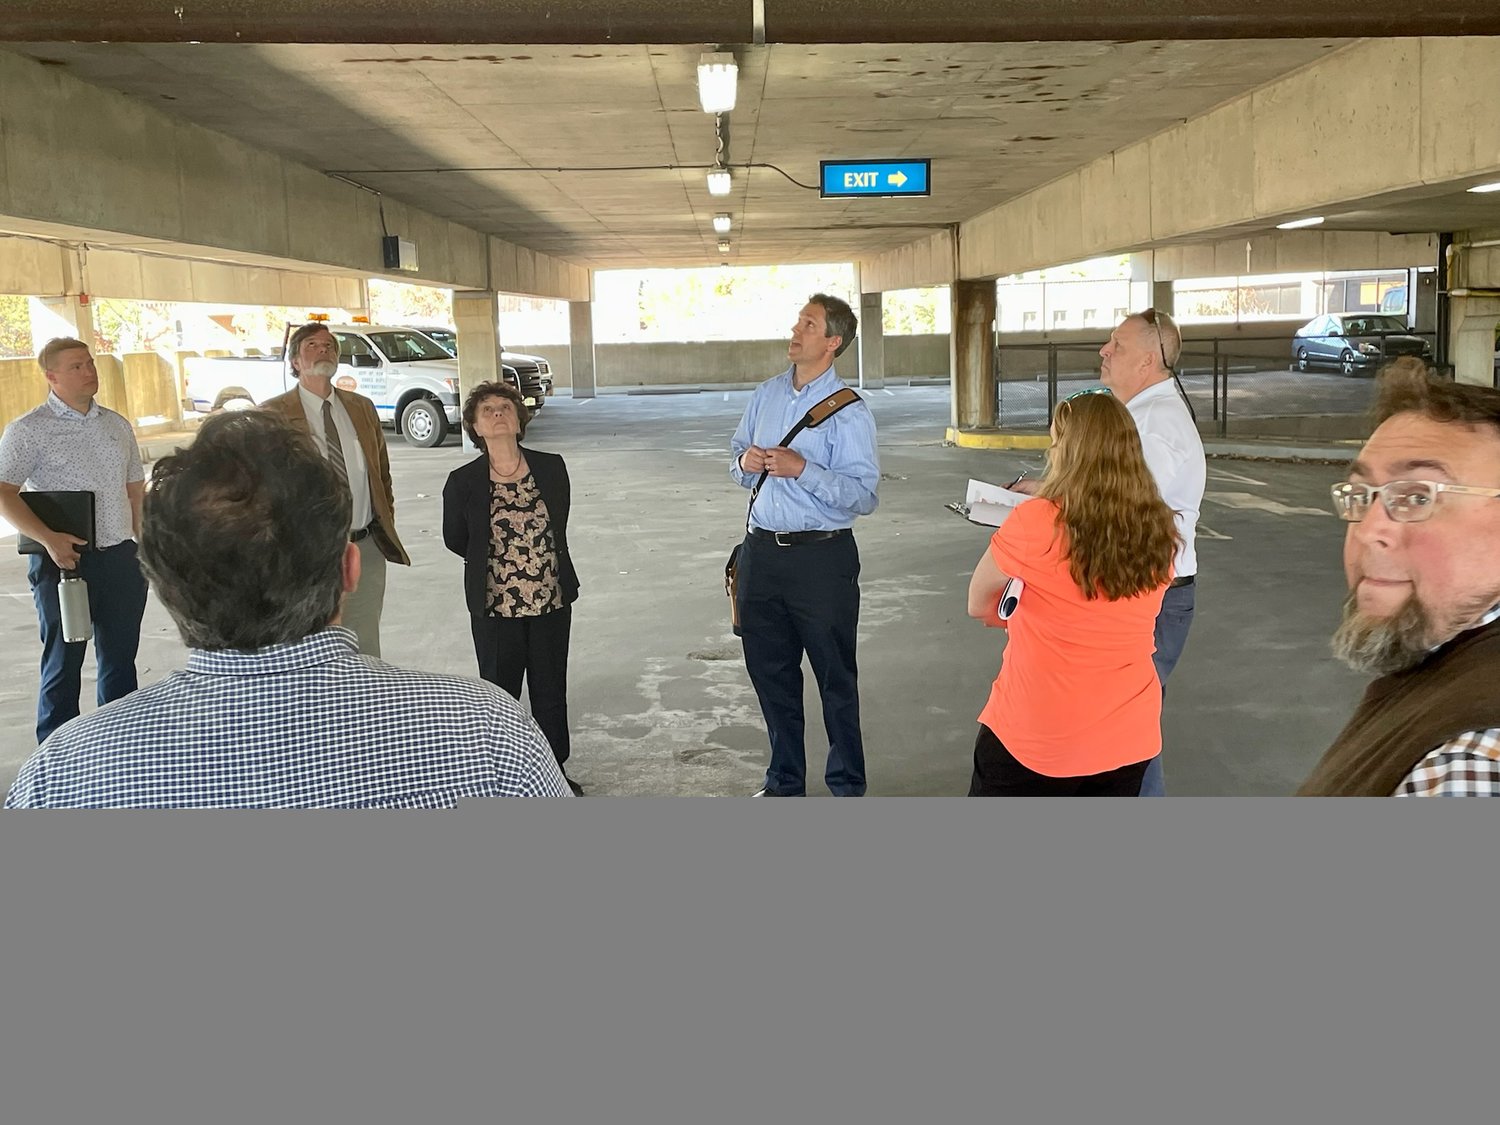 Engineer Christopher N. Latreille, middle, shows Rome councilors and city officials the condition of the ceiling at the Liberty James Garage during a walk-through and special presentation by Bergmann Architects, Engineers, Planners Wednesday.